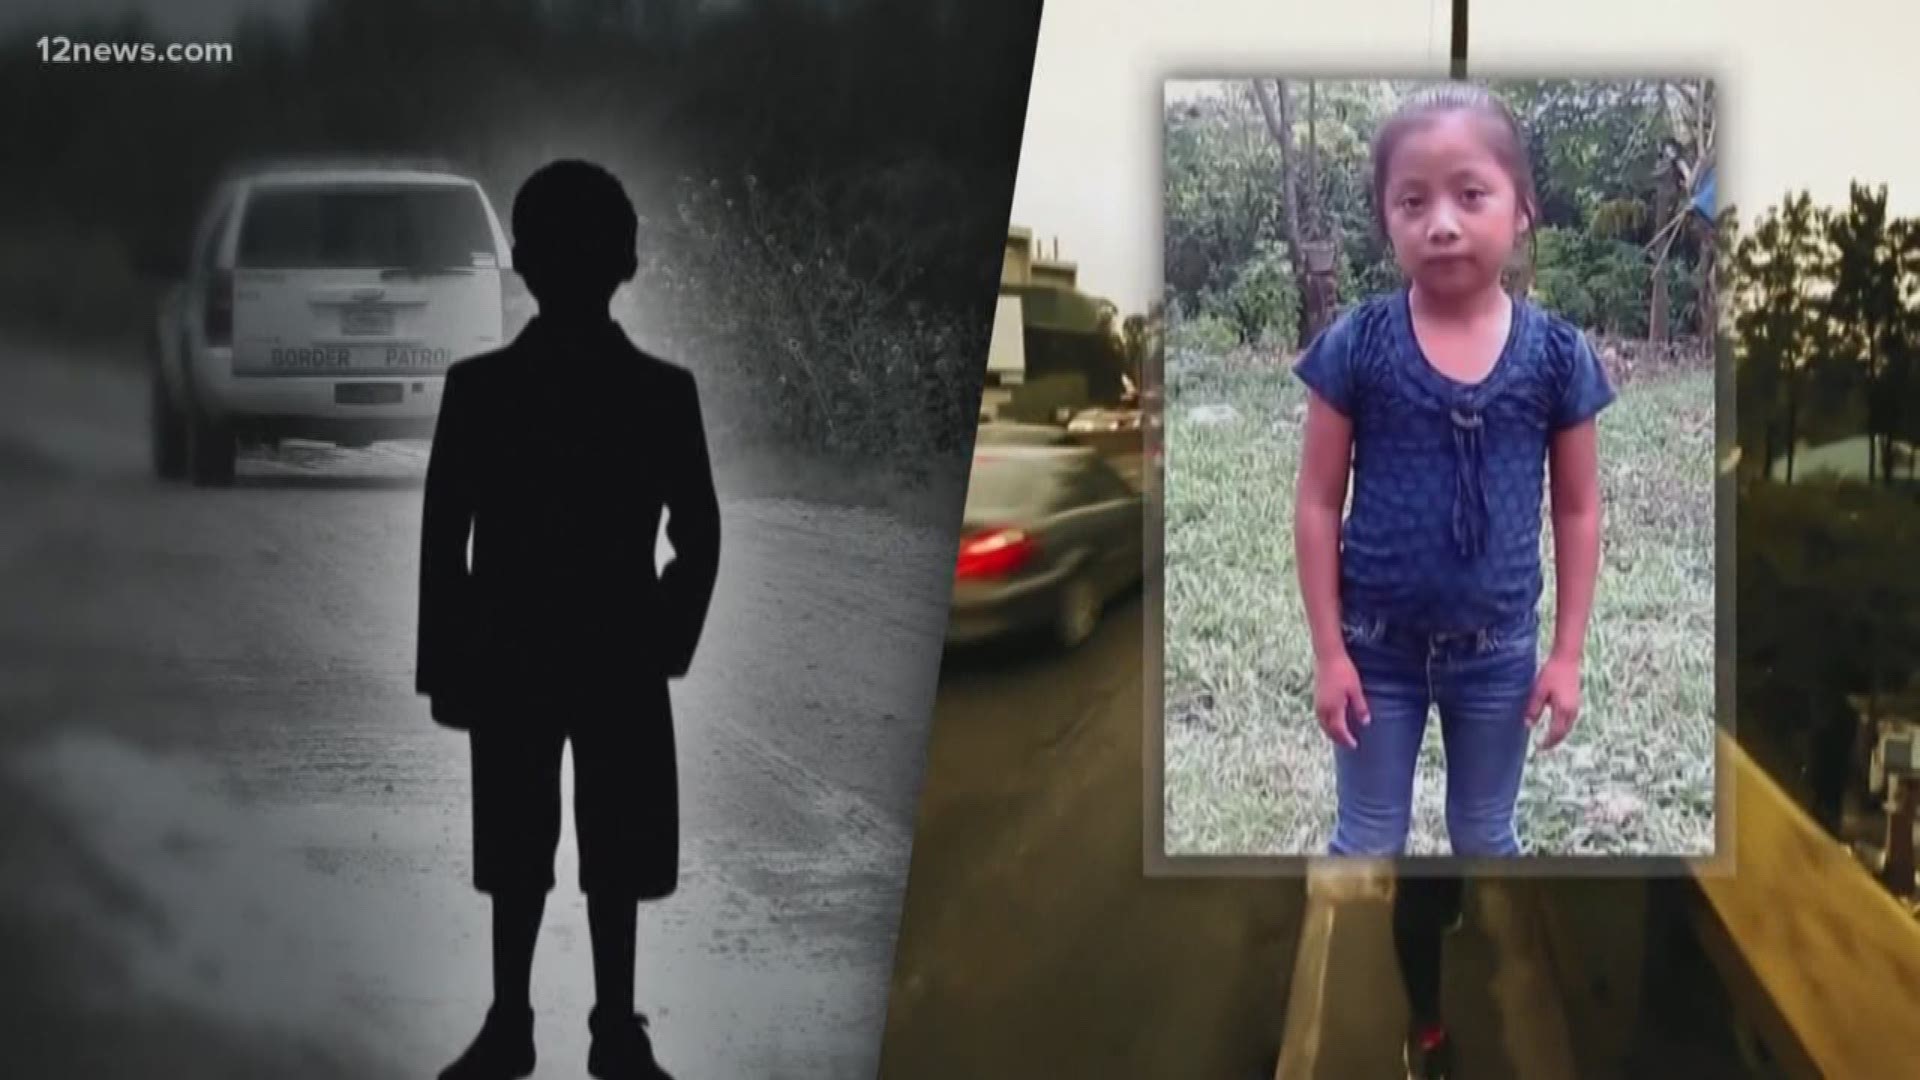 An eight-year-old boy and a seven-year-old girl, both from Guatemala, have died while in the custody of Customs and Border Patrol. Changes are being implemented when it comes to caring for children arriving at the border.